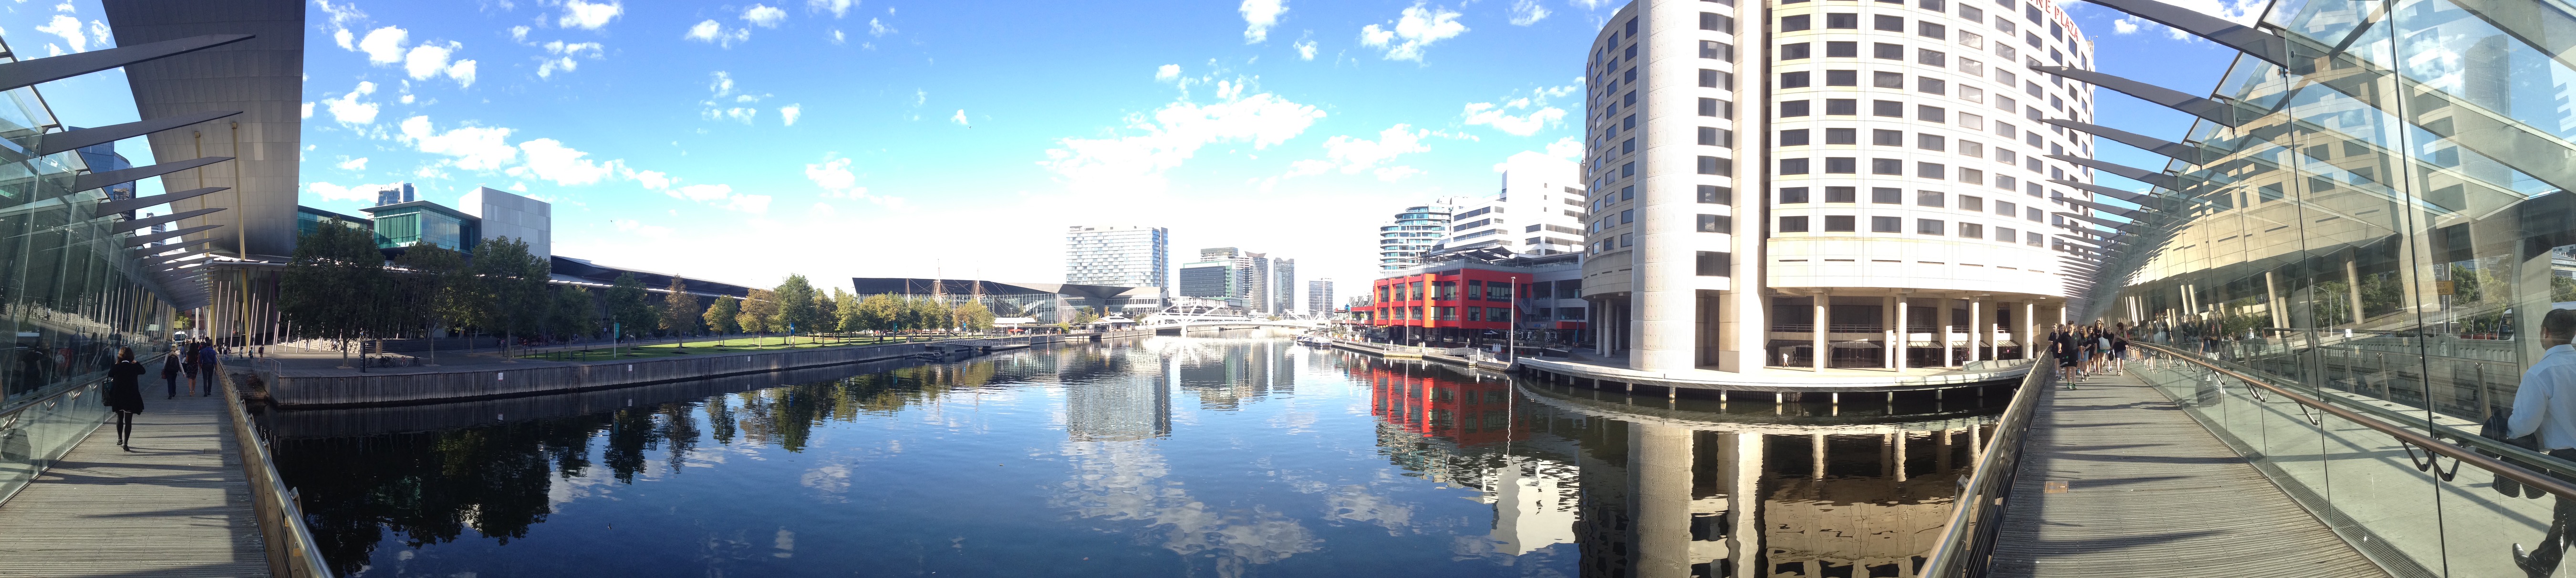 Panorama of the Yarra River, including the Melbourne Convention Centre